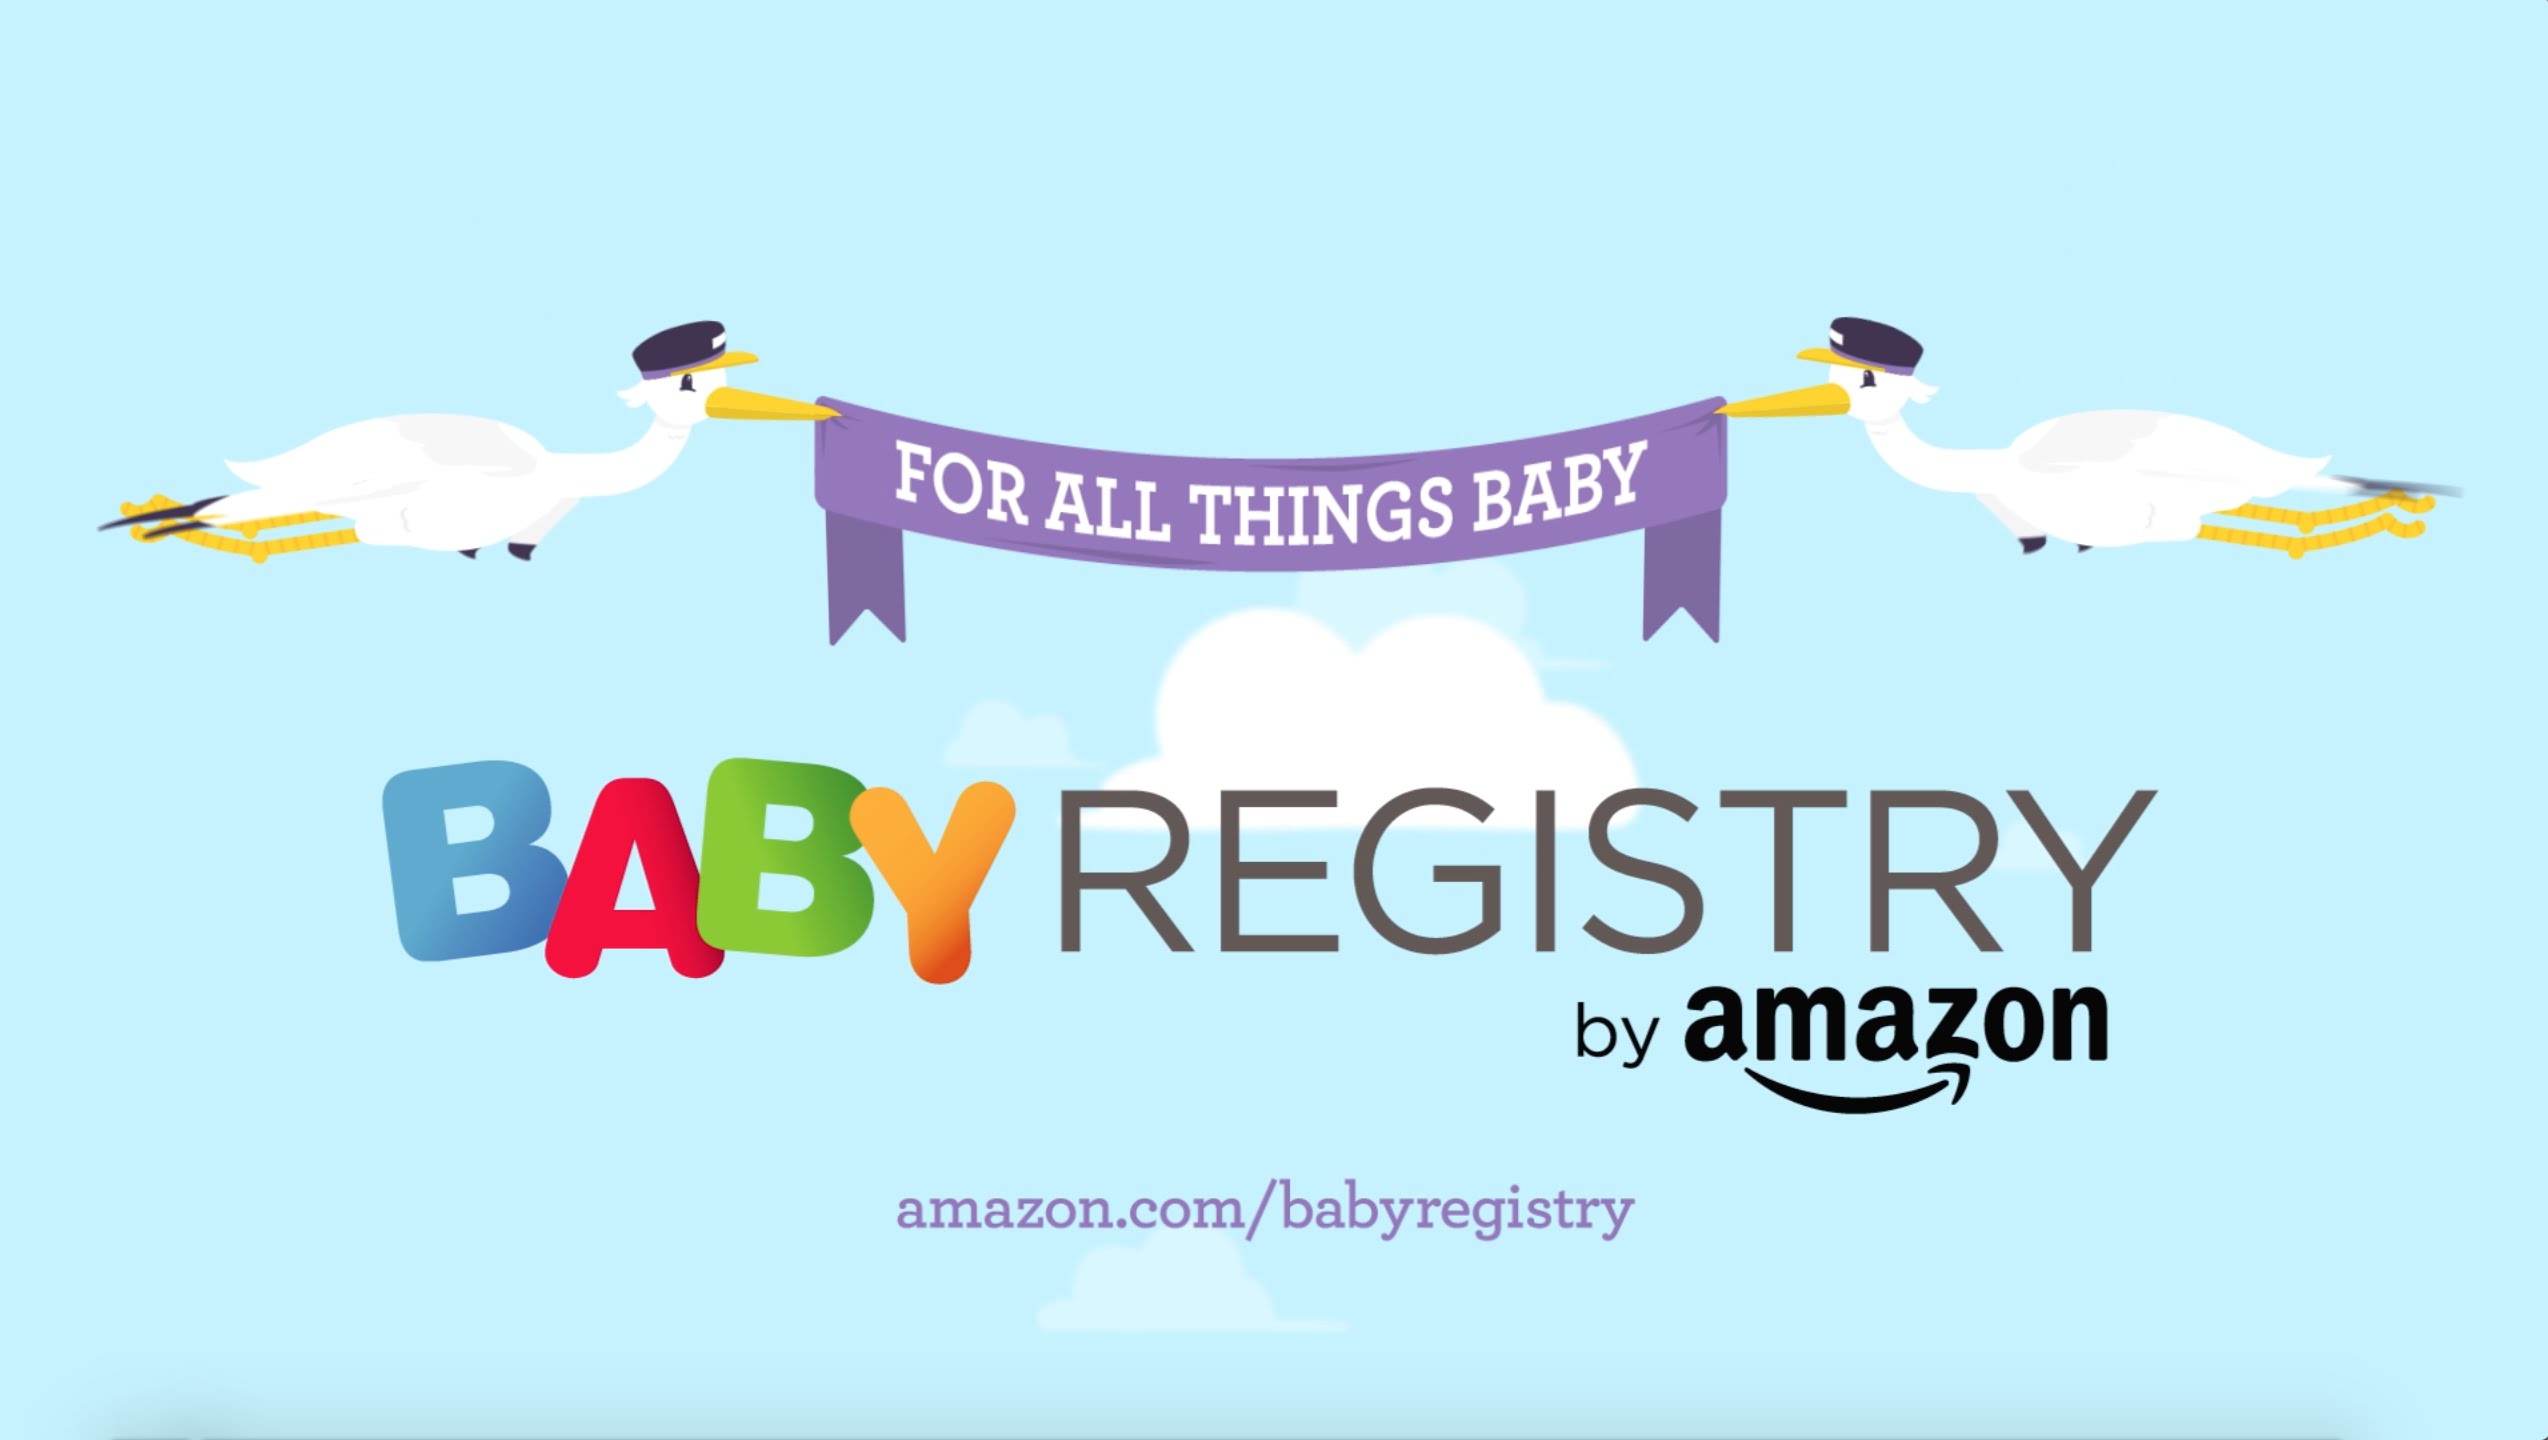 FREE Baby Welcome Box With Amazon Baby Registry!